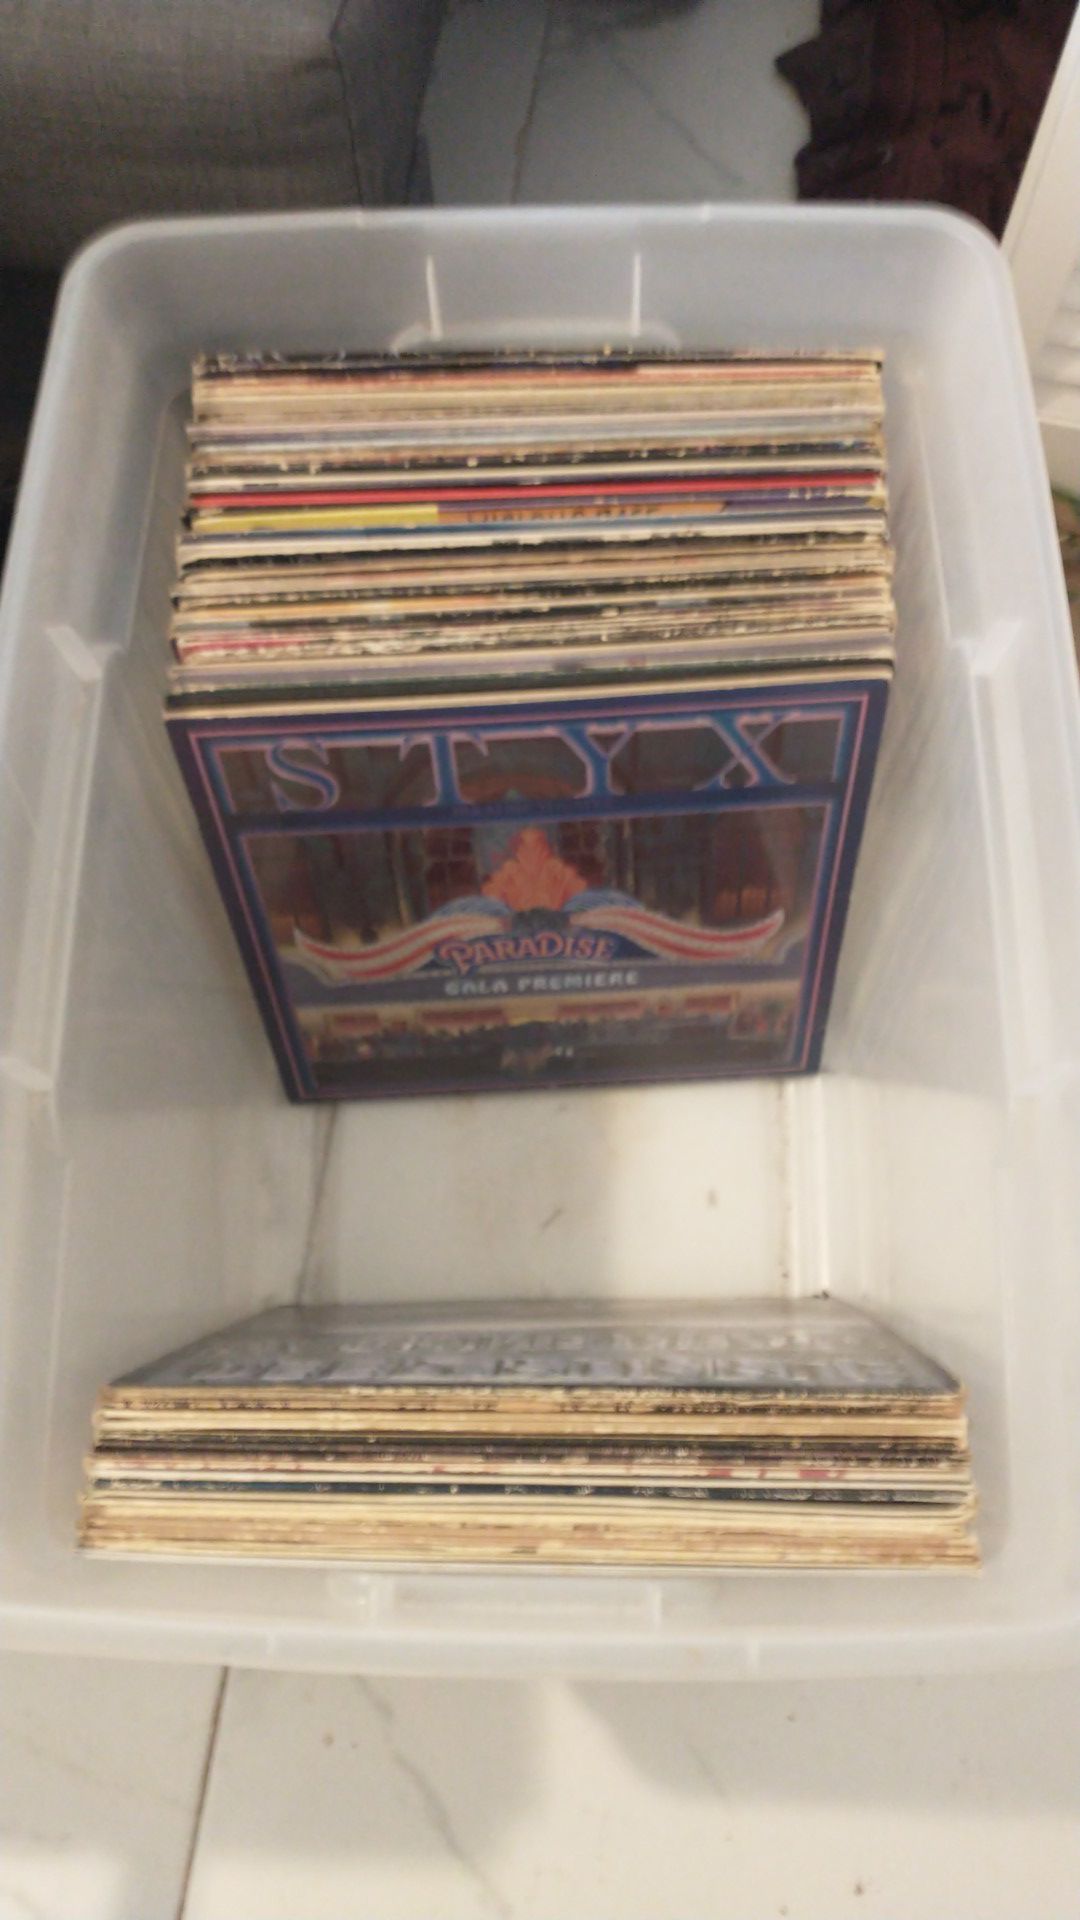 50+ Records, mostly rock with some classical and soundtracks